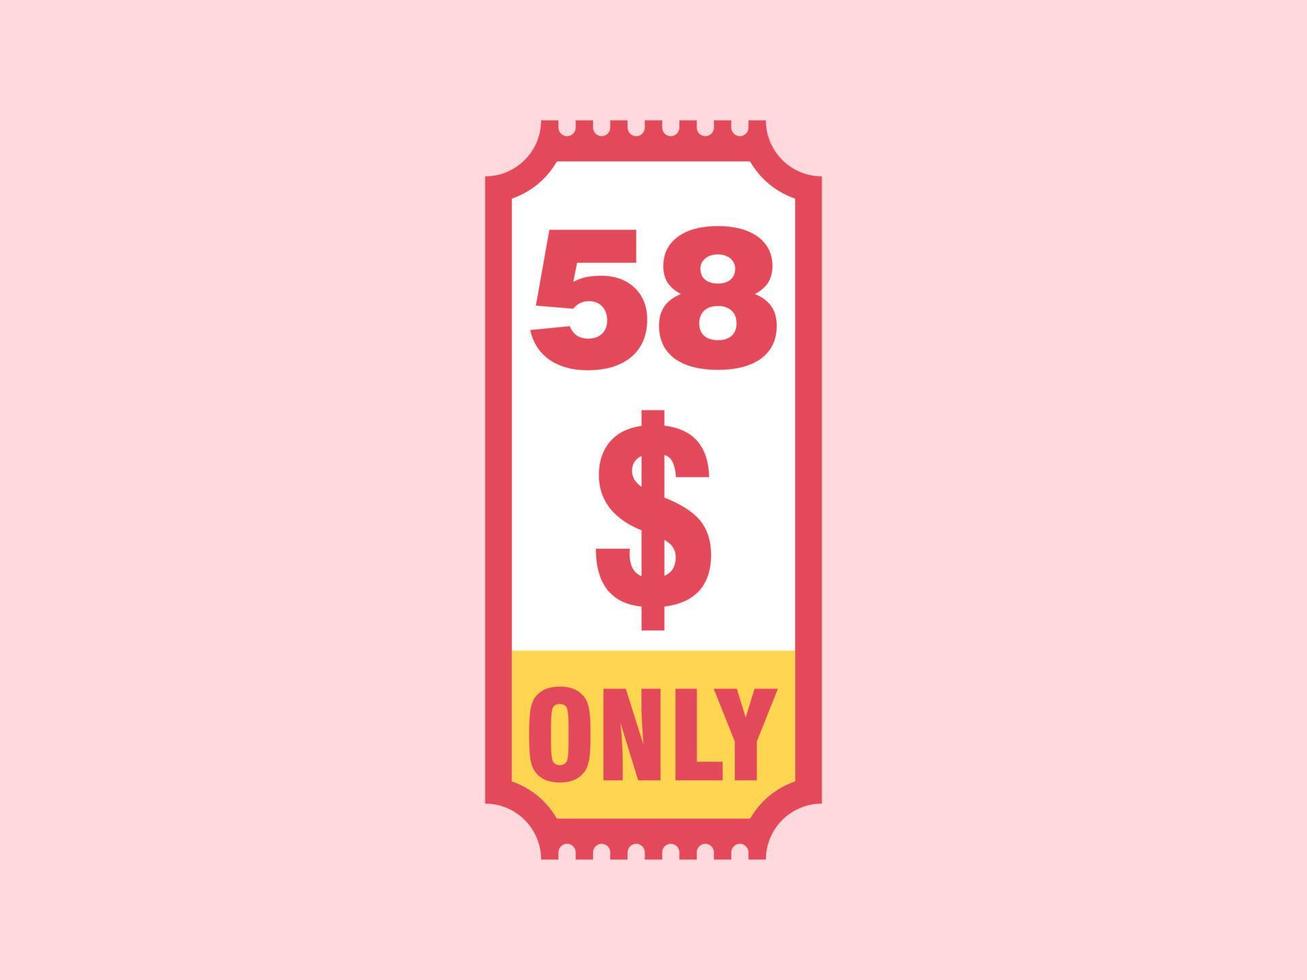 58 Dollar Only Coupon sign or Label or discount voucher Money Saving label, with coupon vector illustration summer offer ends weekend holiday